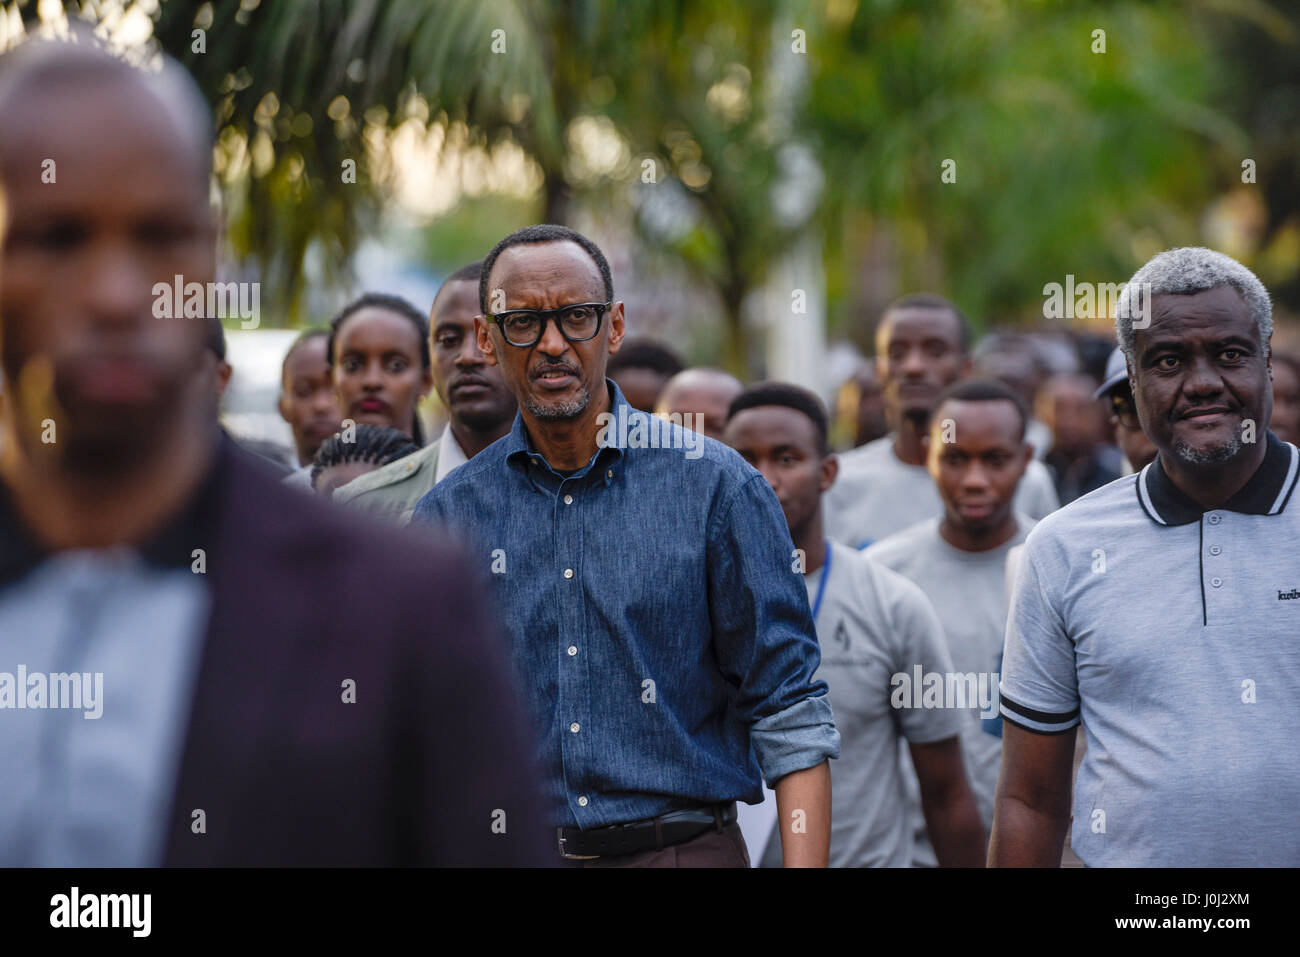 Rwanda, Kigali, on 2017/04/07: official ceremonies for the 23rd commemoration of the 1994 genocide between Hutus and Tutsis, 'Kwibuka 23'. 23 years after the 1994 mass slaughter of Tutsi during which 800000 people were massacred, the Rwandan people gathered to honor the memory of the victims Stock Photo